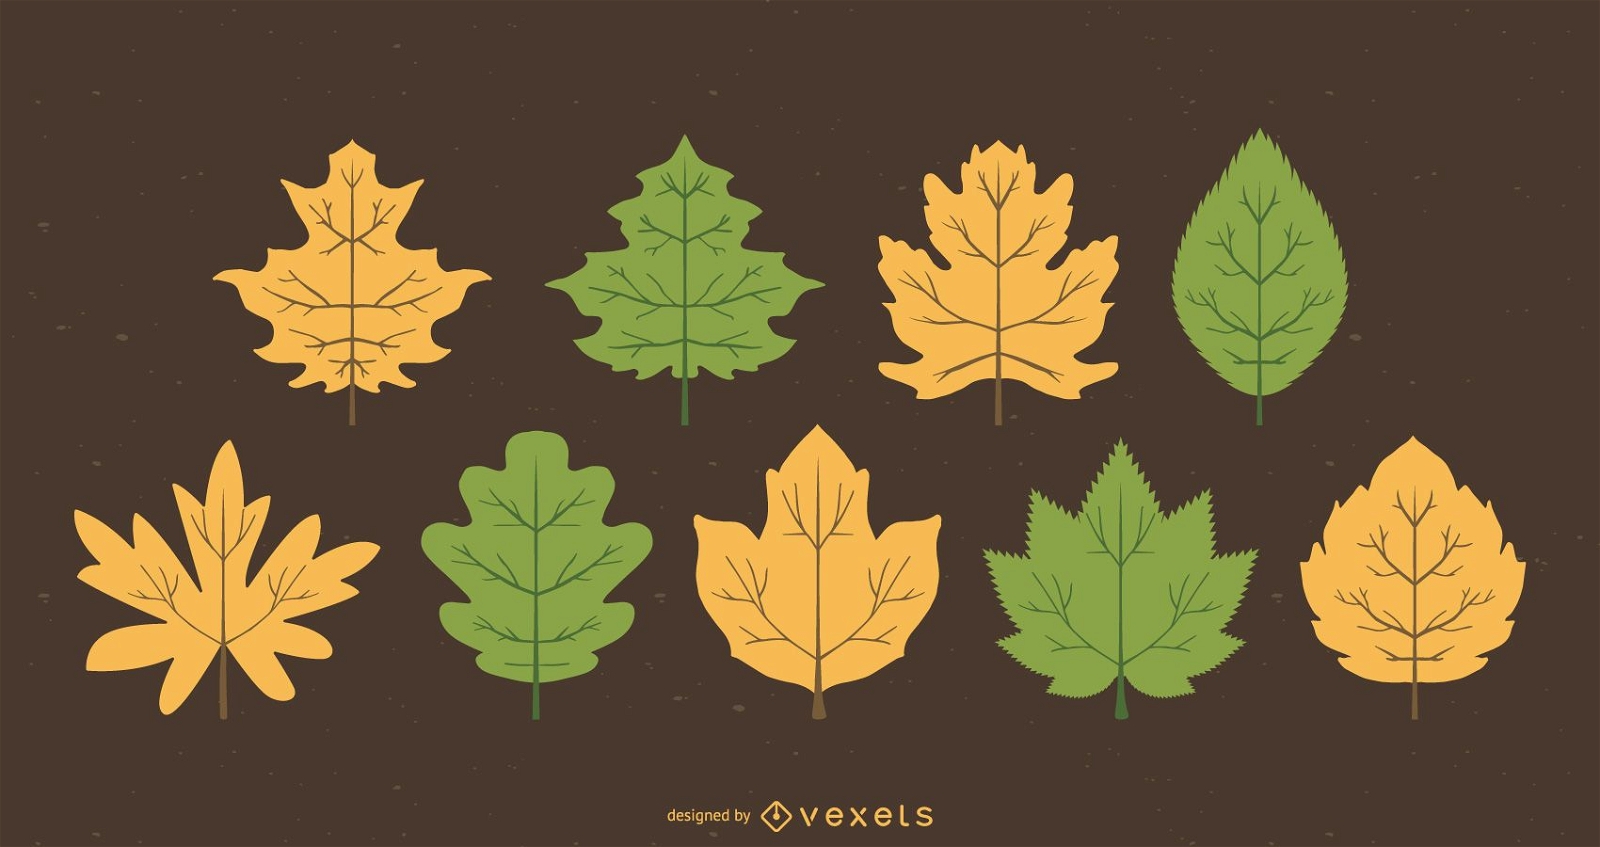 Green and yellow leaves set